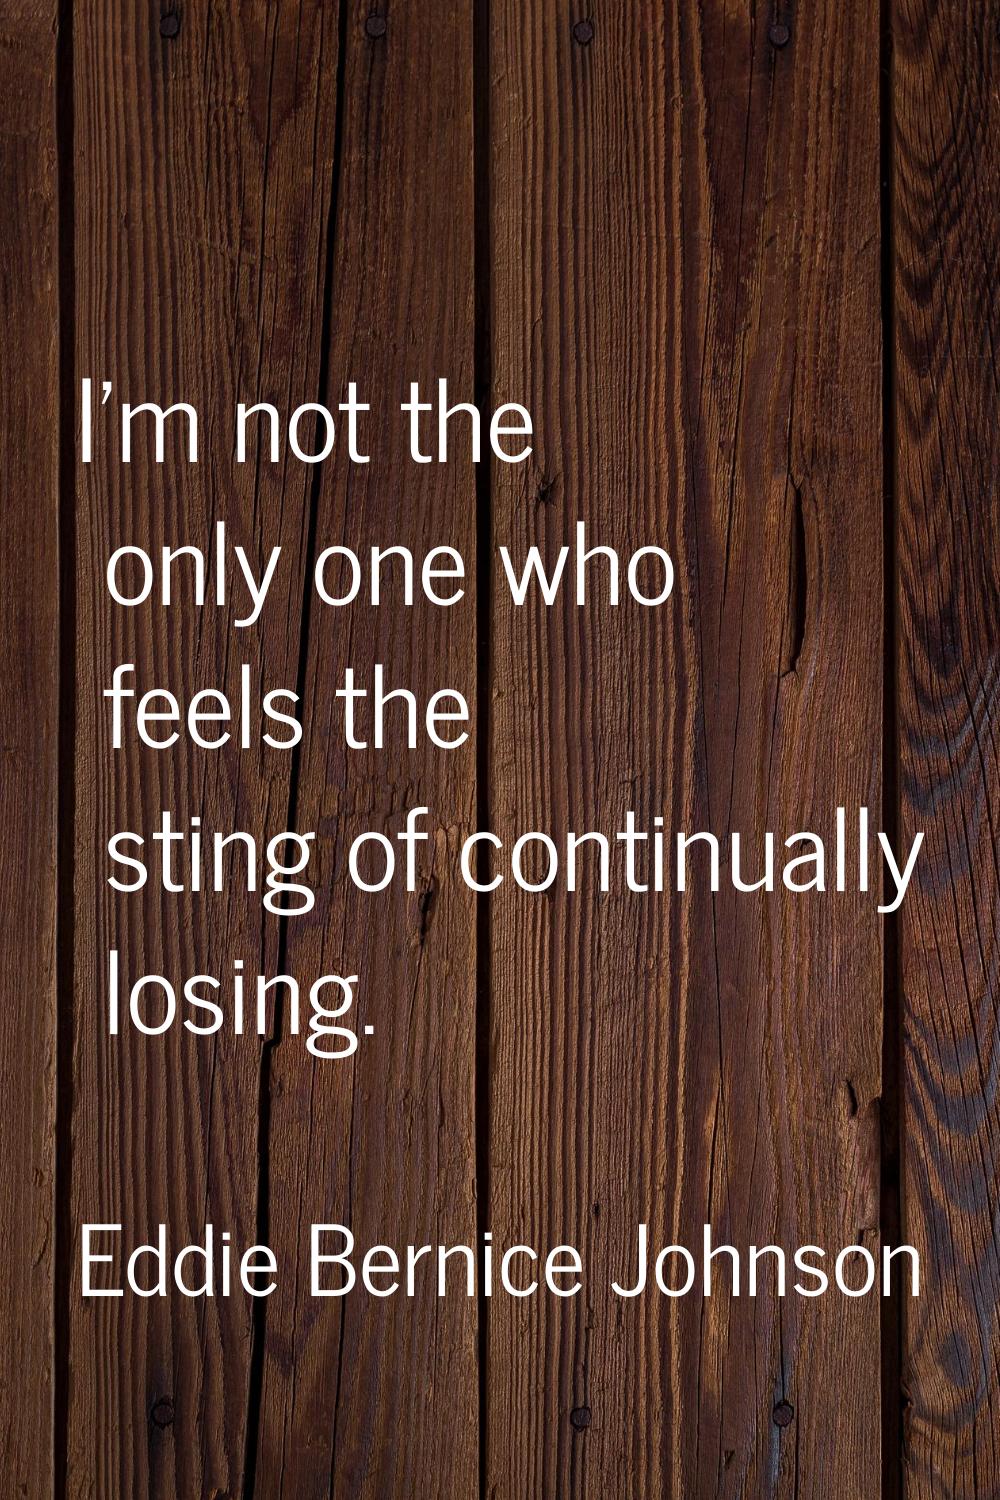 I'm not the only one who feels the sting of continually losing.